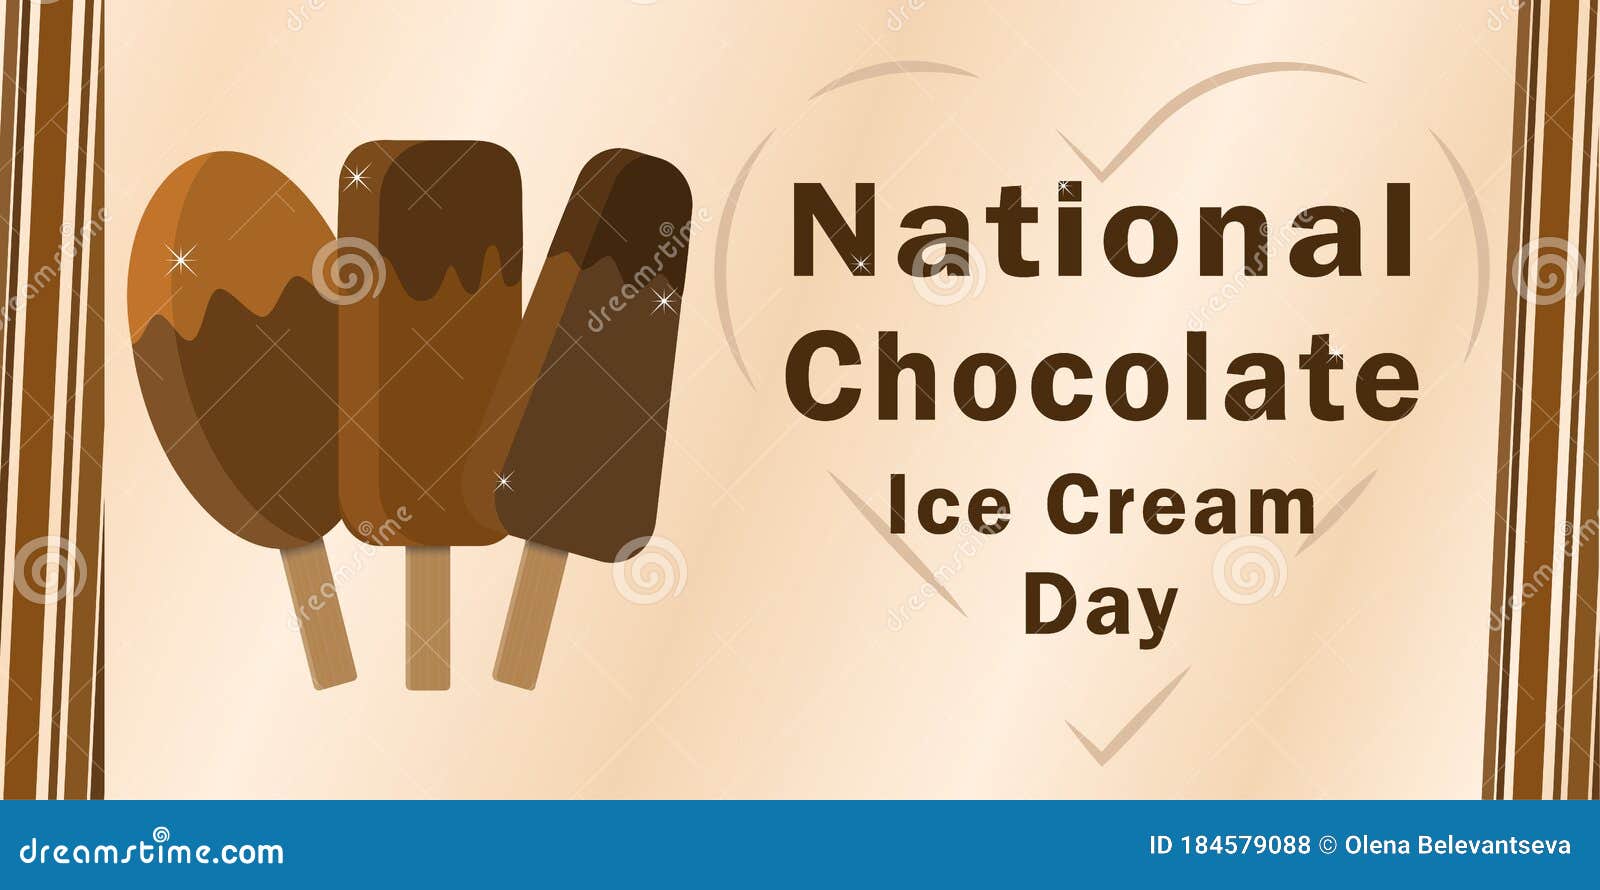 National Chocolate Ice Cream Day is Traditionally Celebrated on the